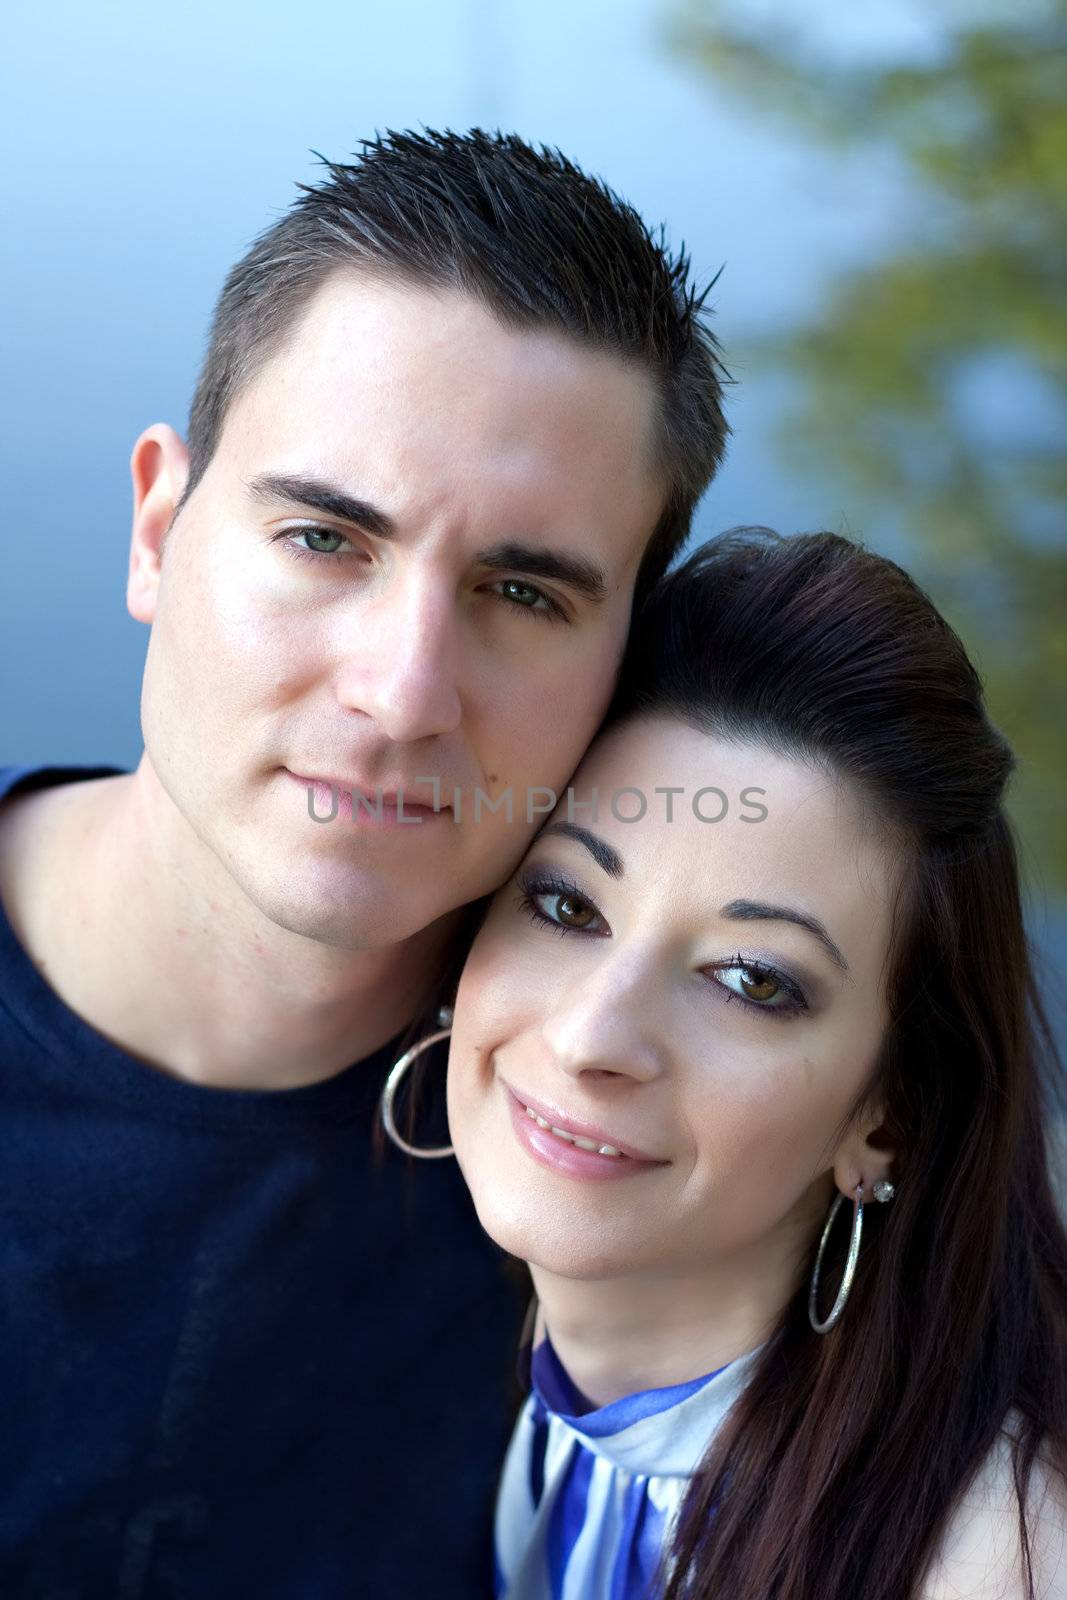 A happy young couple in their mid 20s smiling with their heads close together.